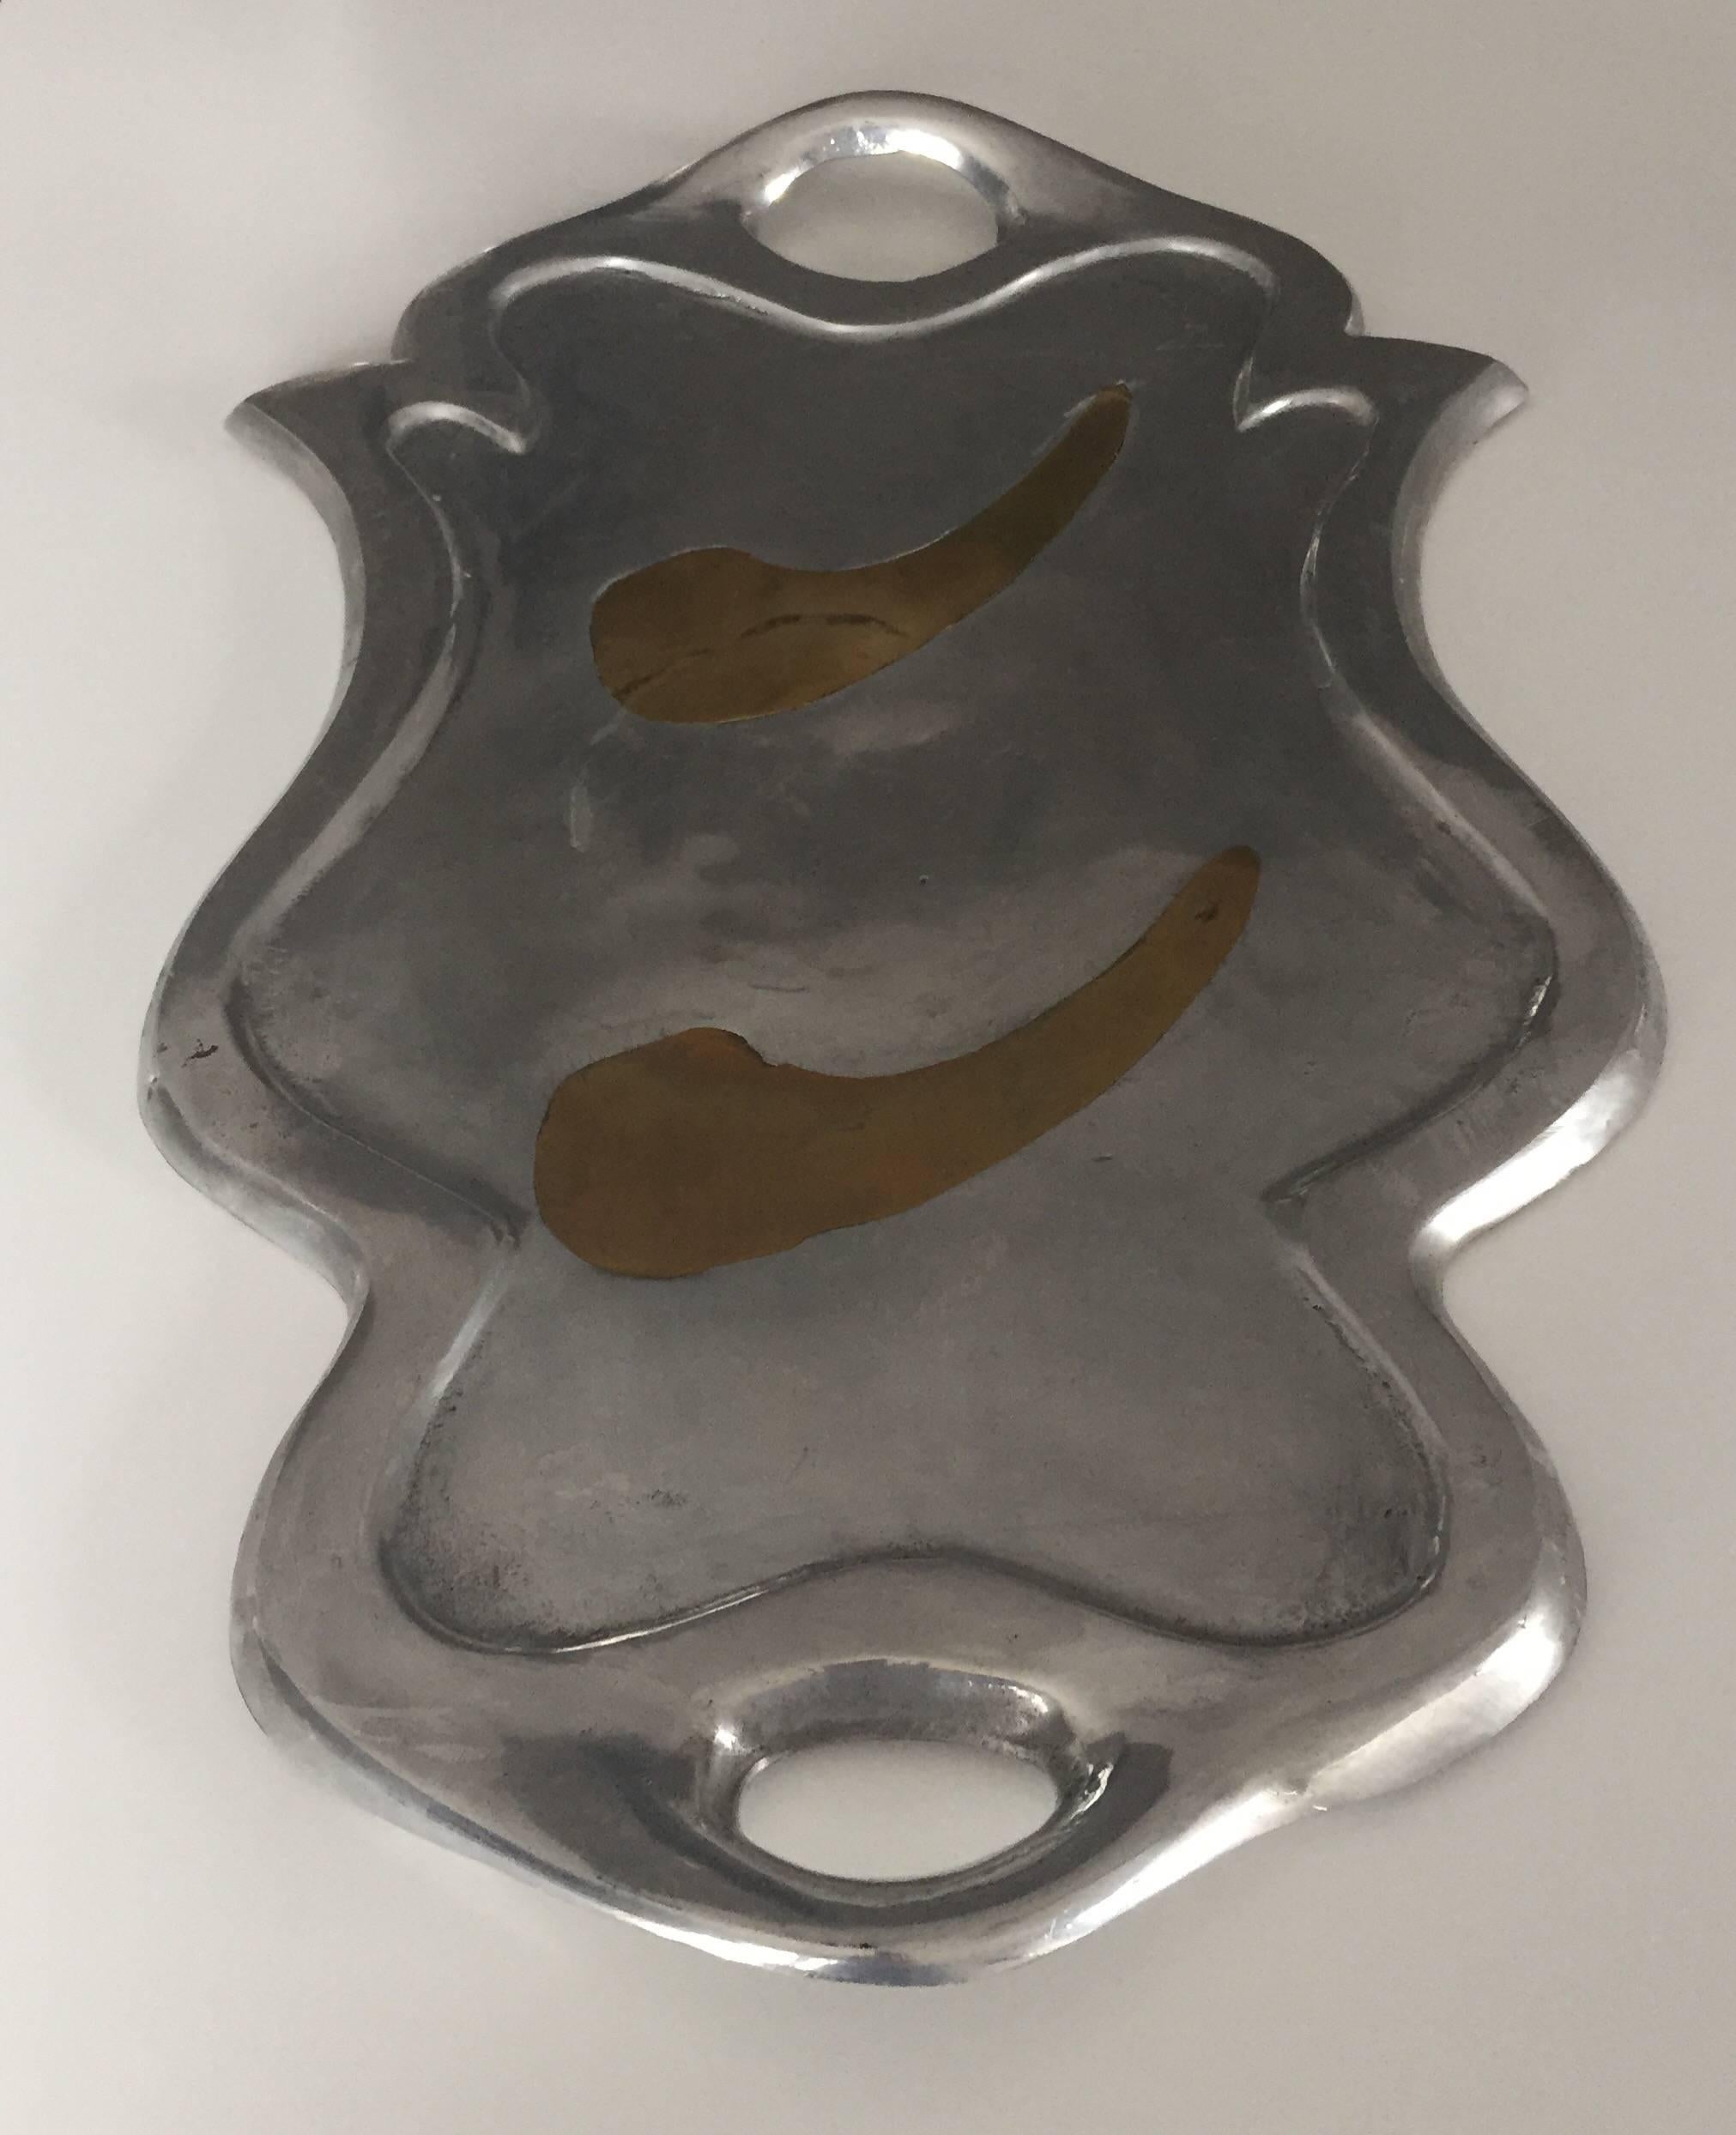 1970s bronze and metal tray.